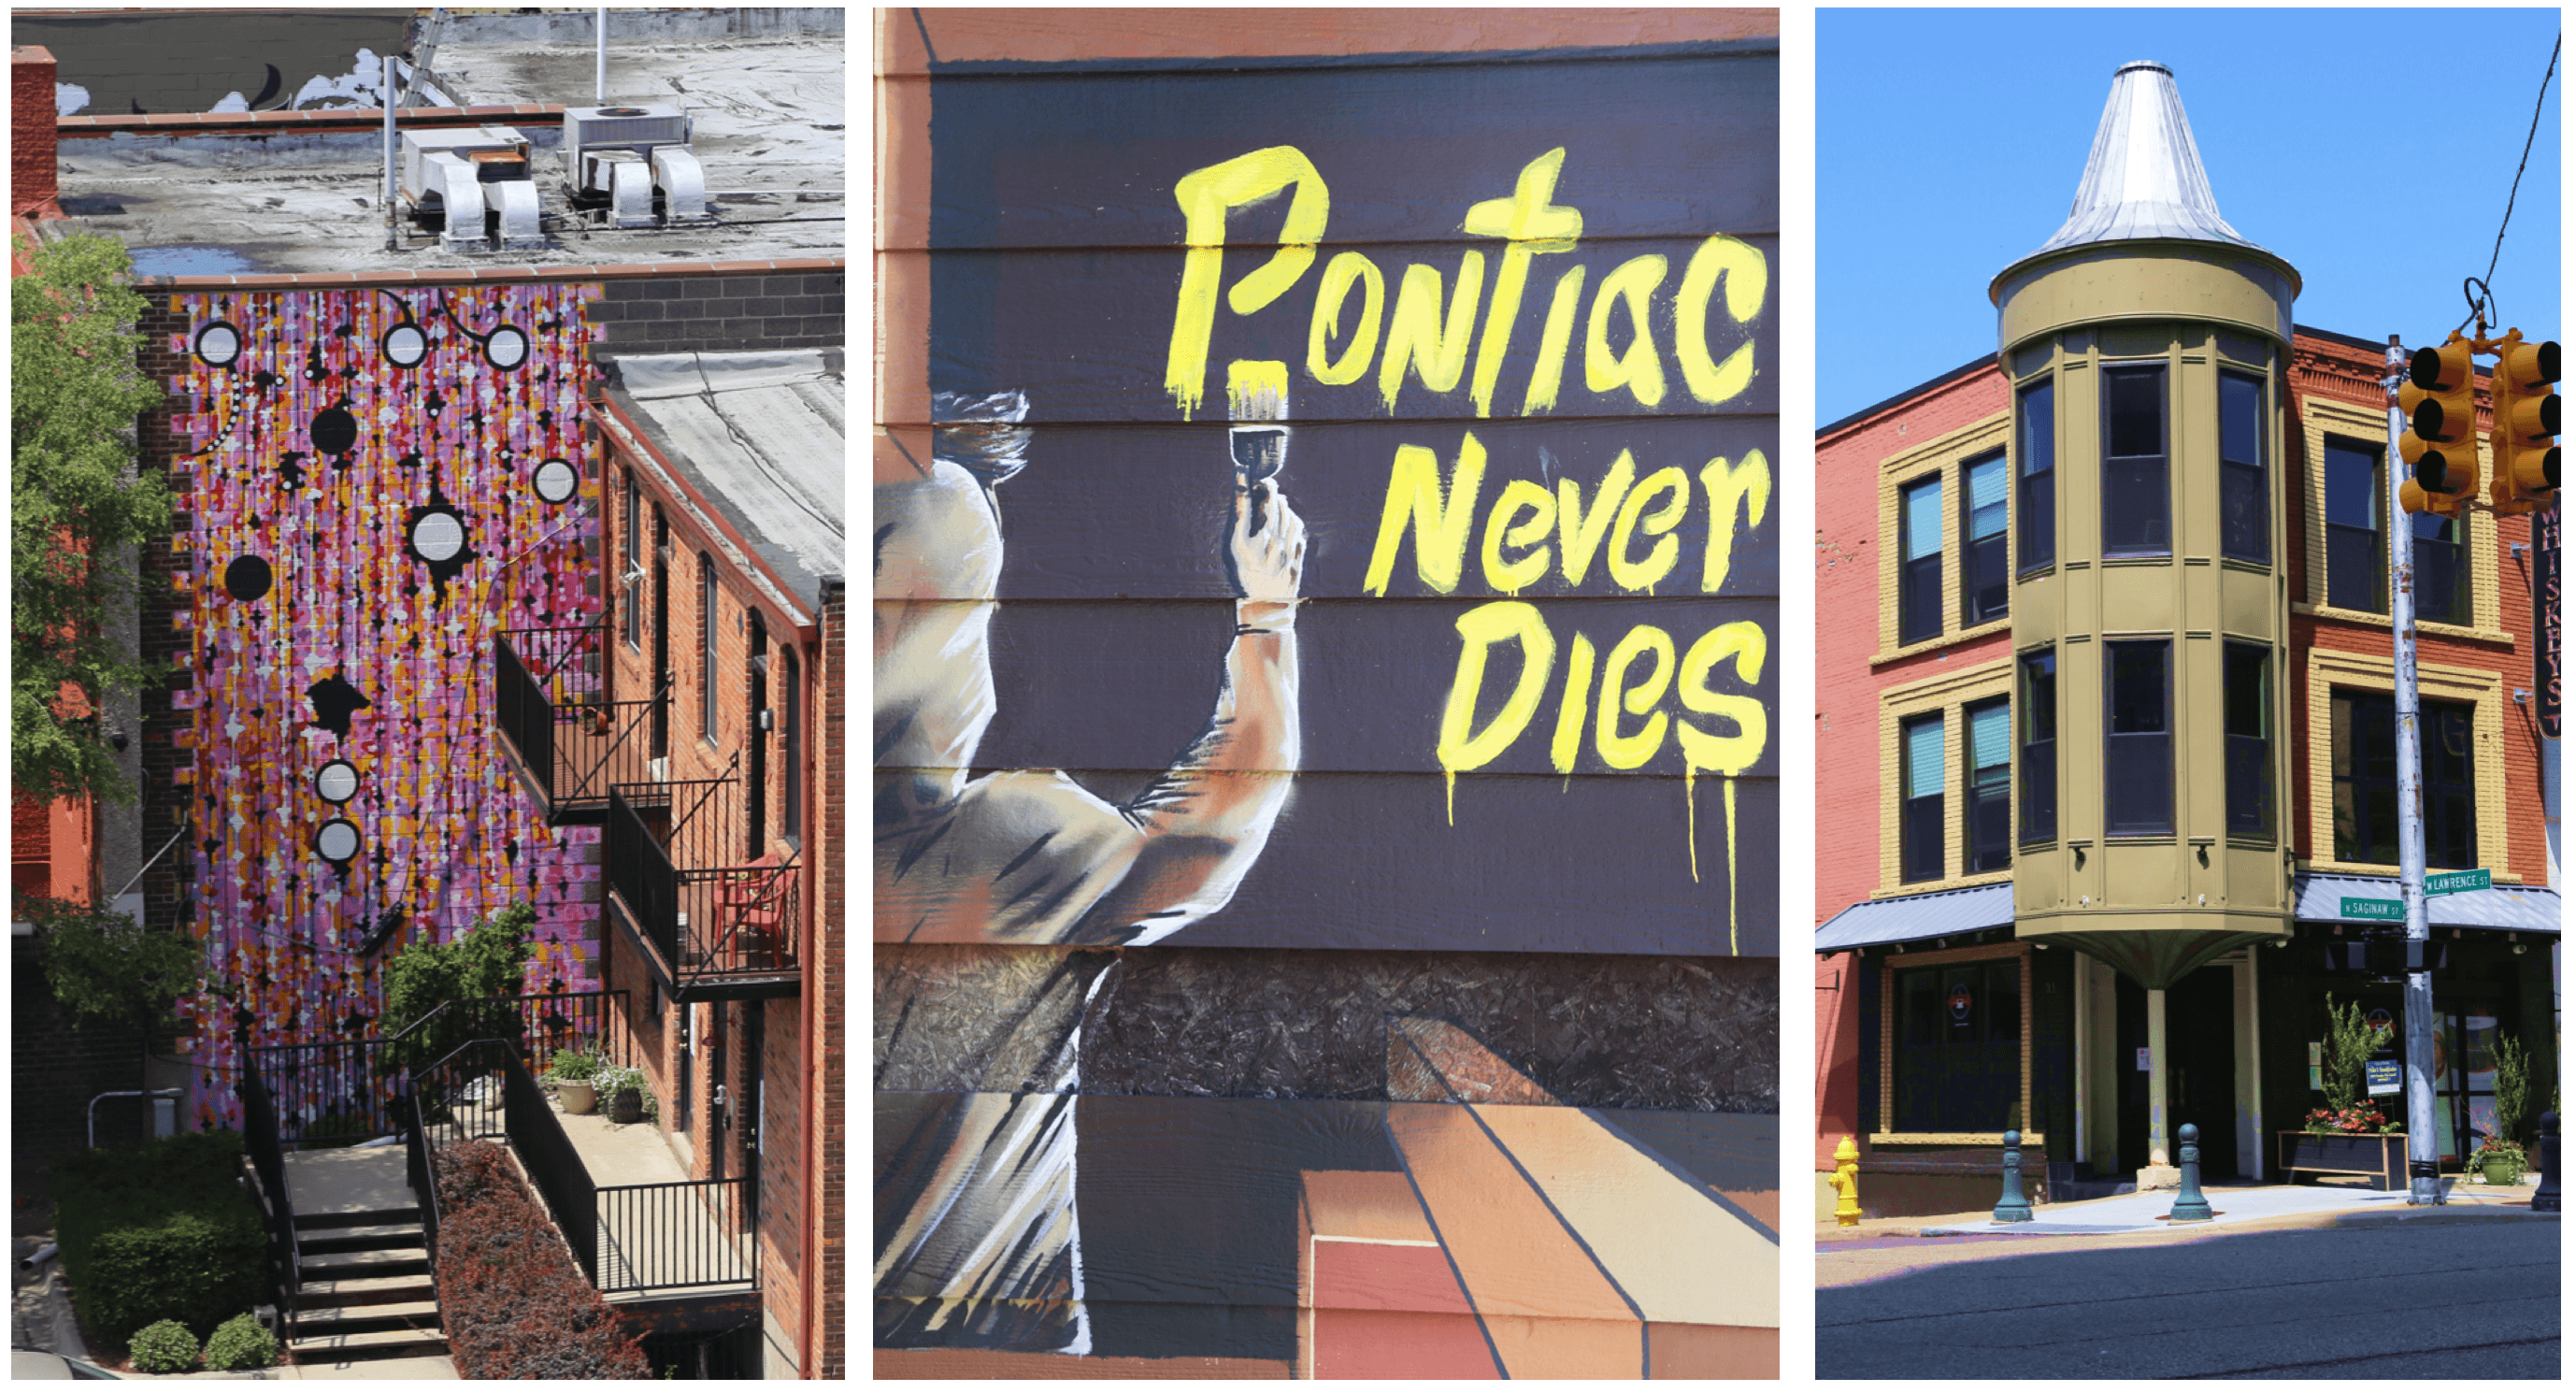 Murals, lofts and offices around downtown Pontiac showcasing the beauty and resilience of Pontiac.